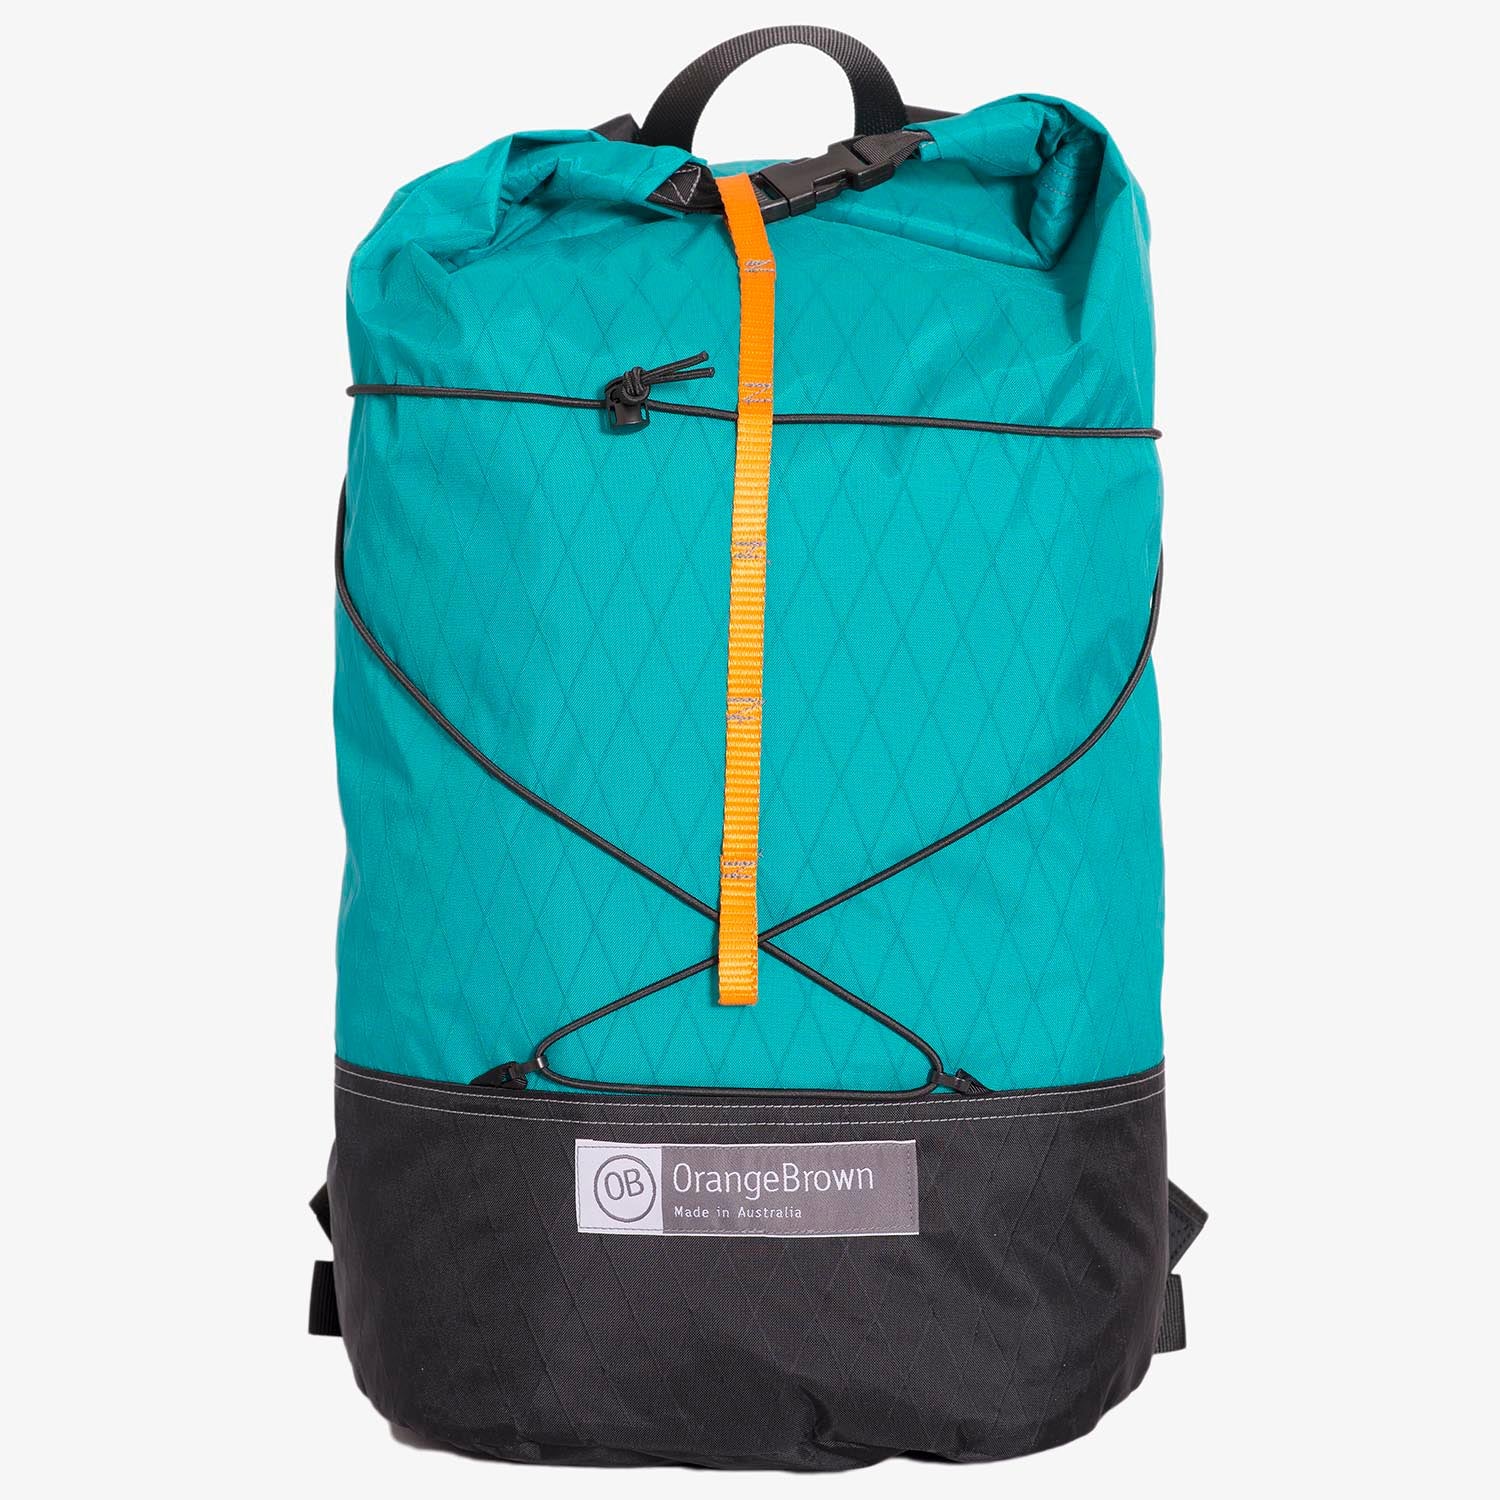 Frontal view of ultralight day pack with roll closure in teal-black. Handmade in Australia from X-Pac fabrics.